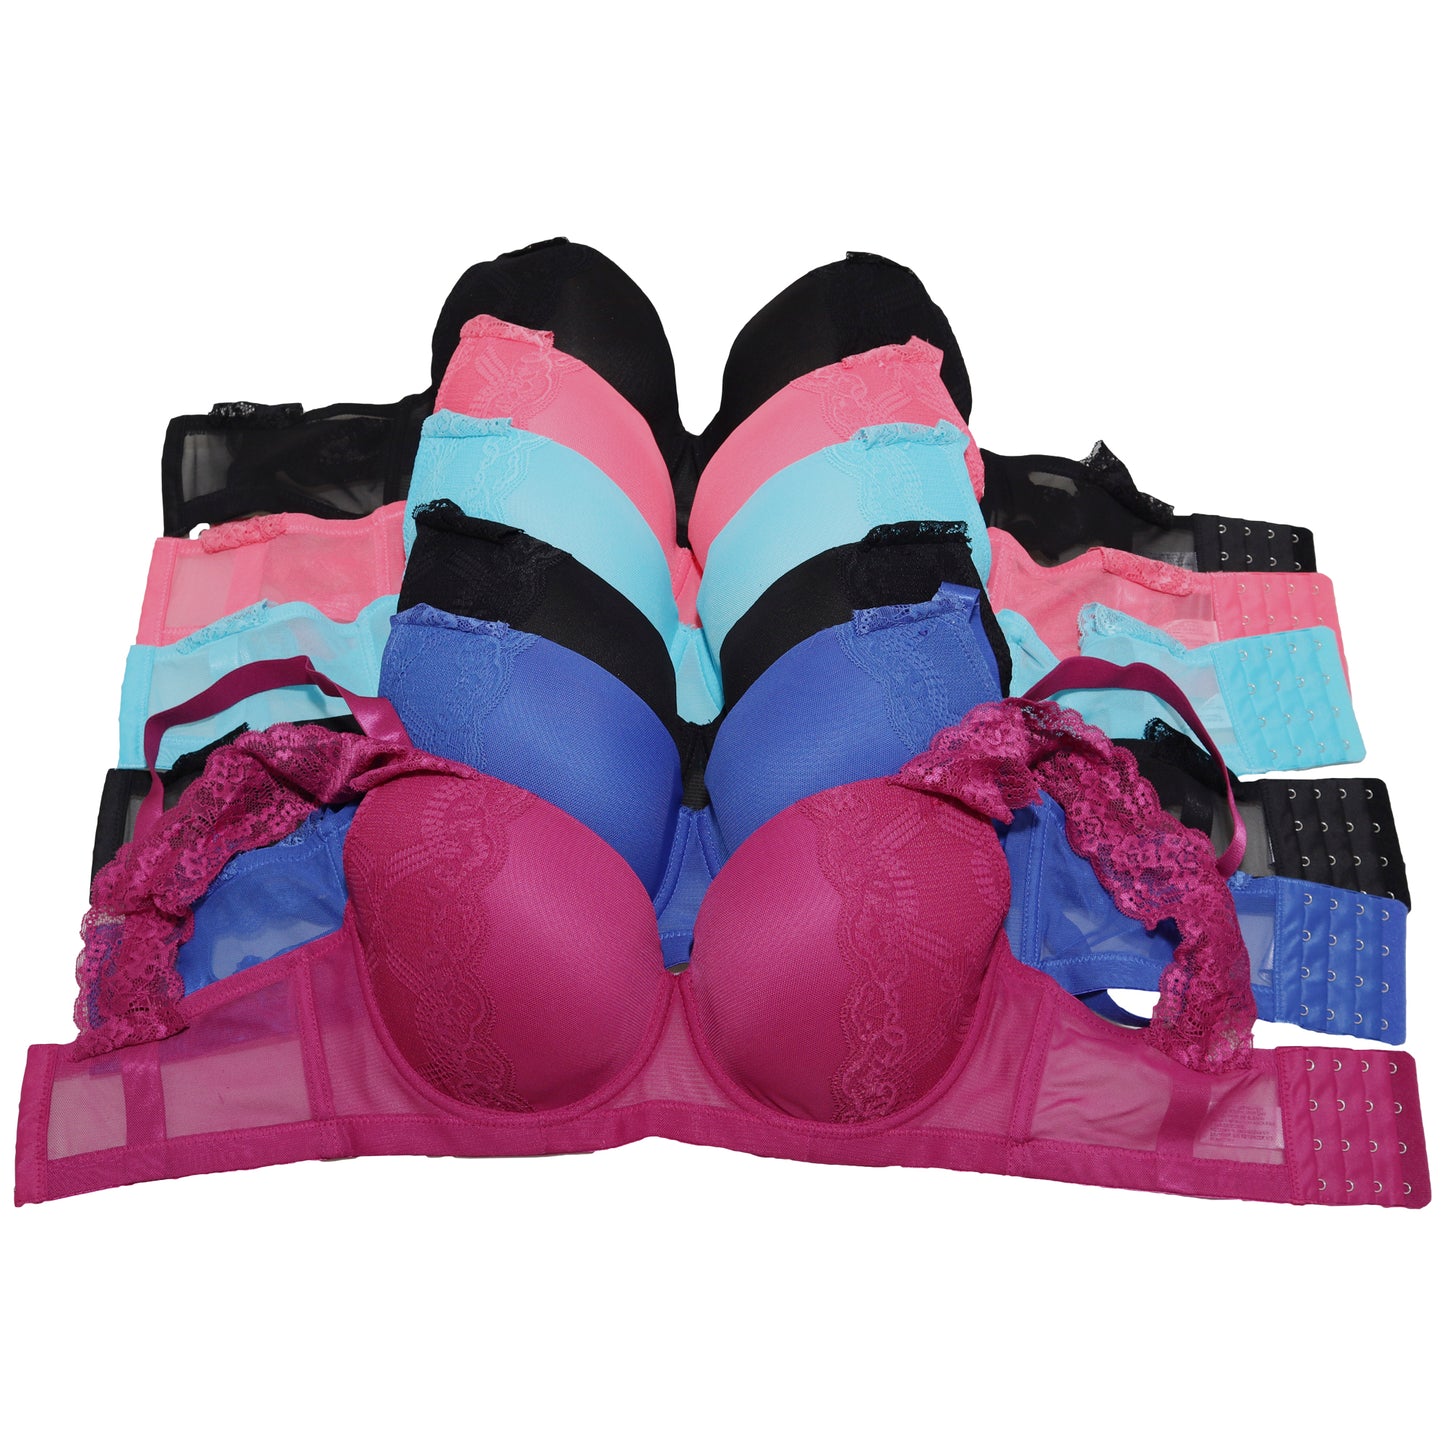 Matching Bras and Panties Set with Mesh Design (6-Pack)